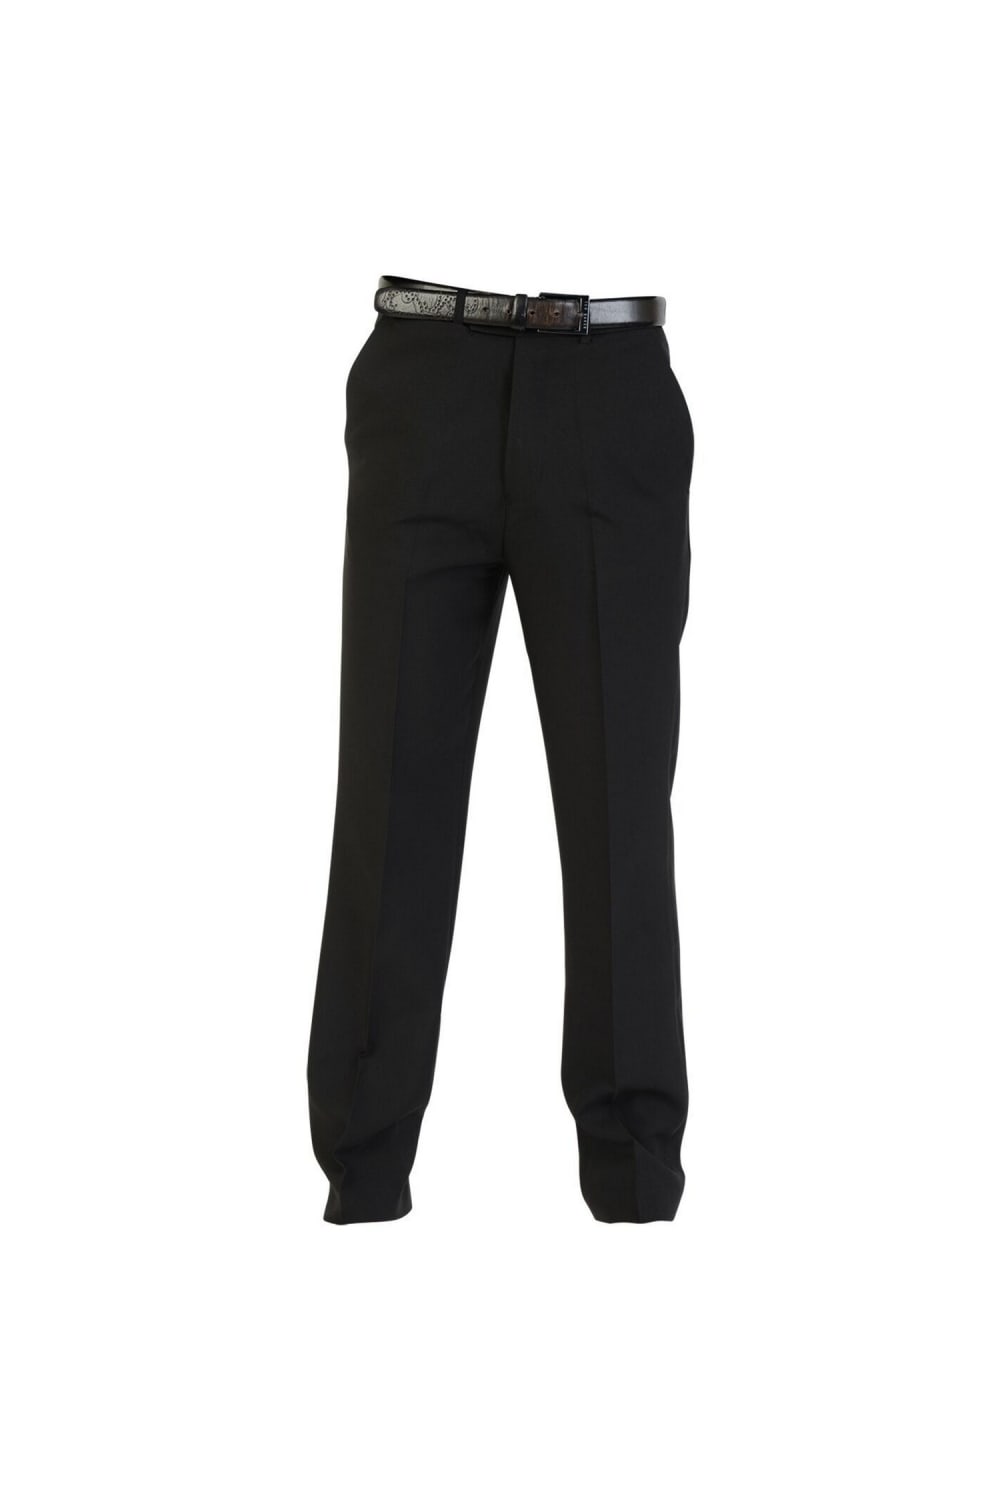 Polyester Workwear Trousers - Black